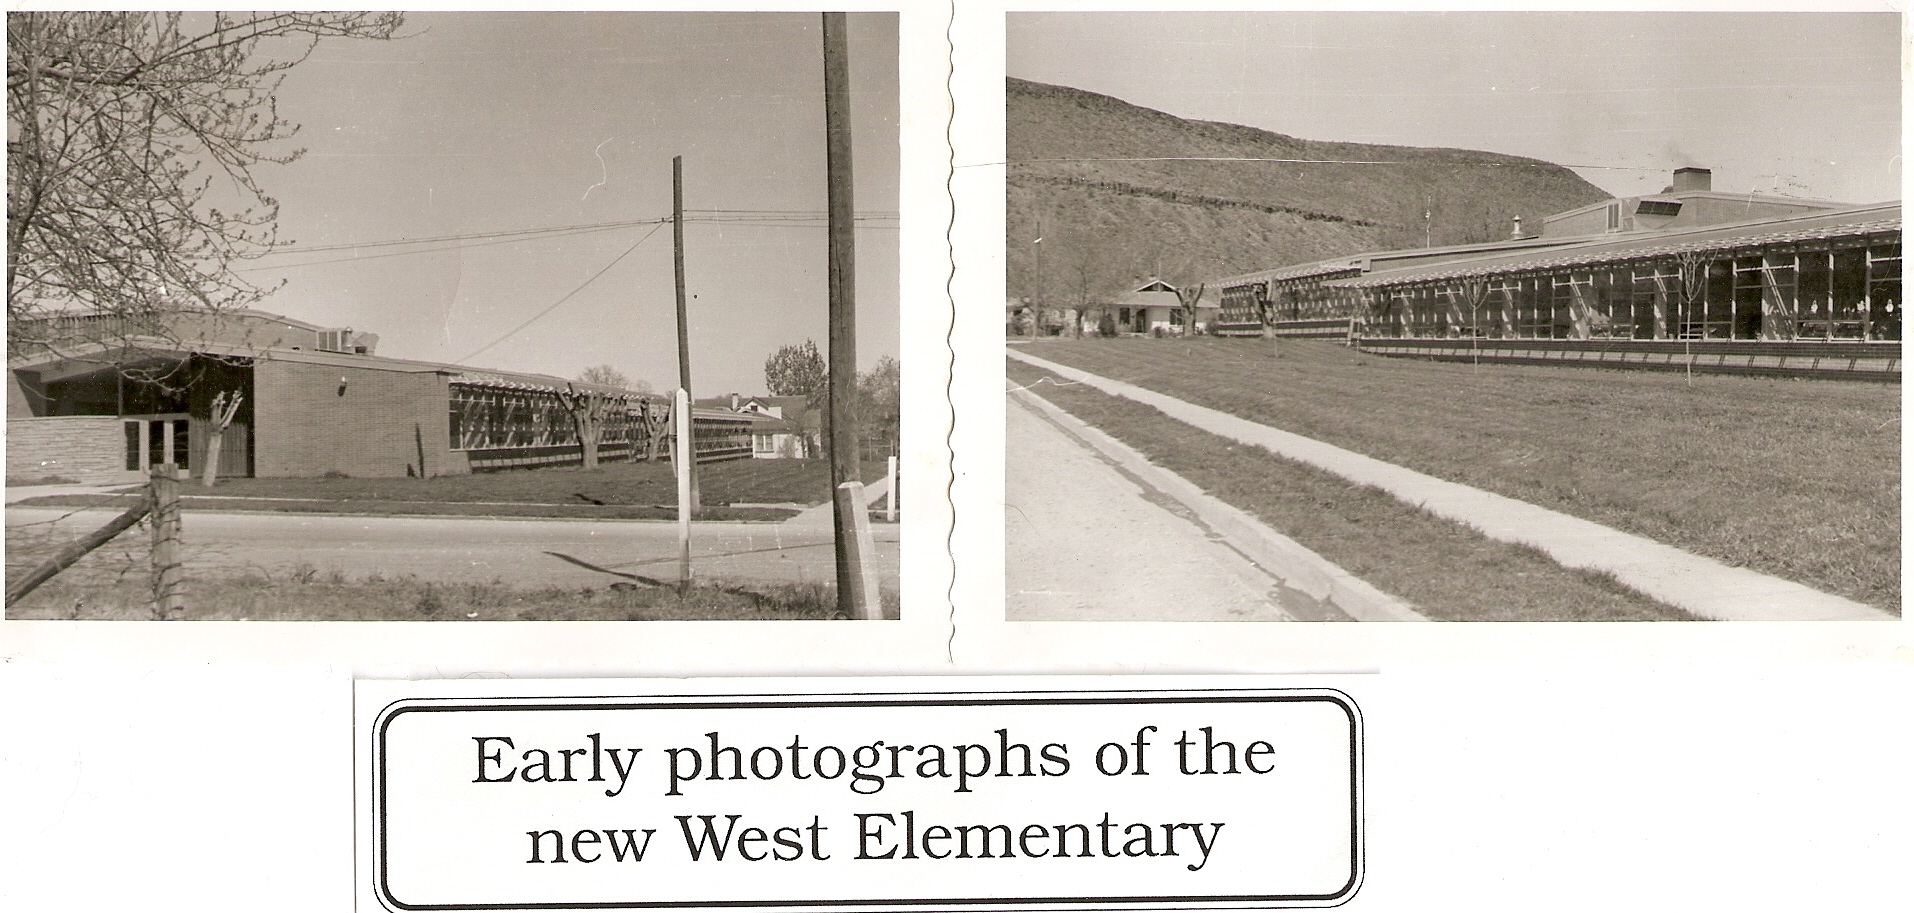 WCHS-00296 South sides of the new West Elementary School in 1956